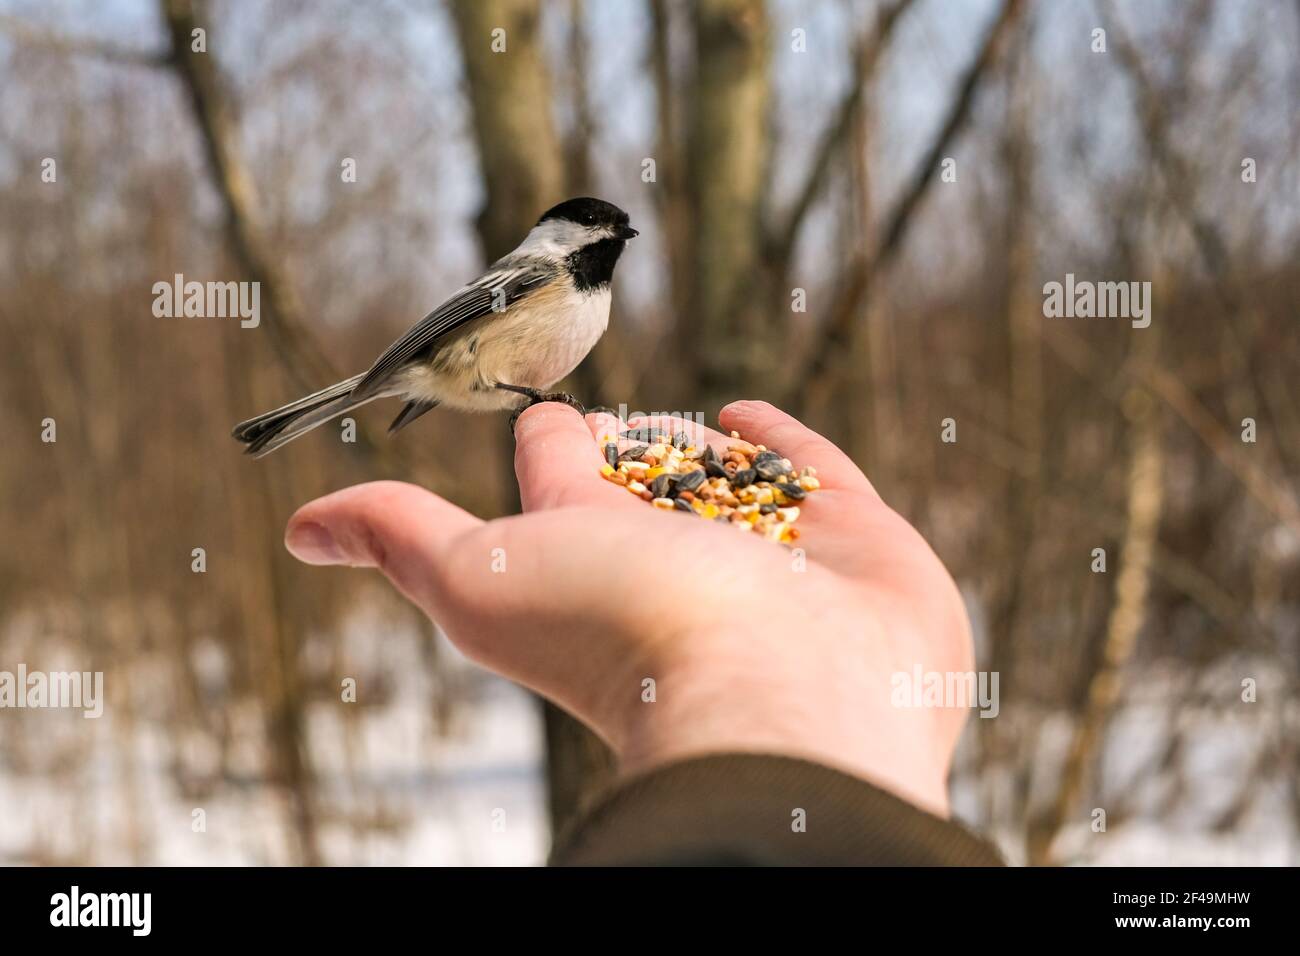 A black-capped chickadee is perched on an outstretched hand holding birdseed in a winter scene. Stock Photo